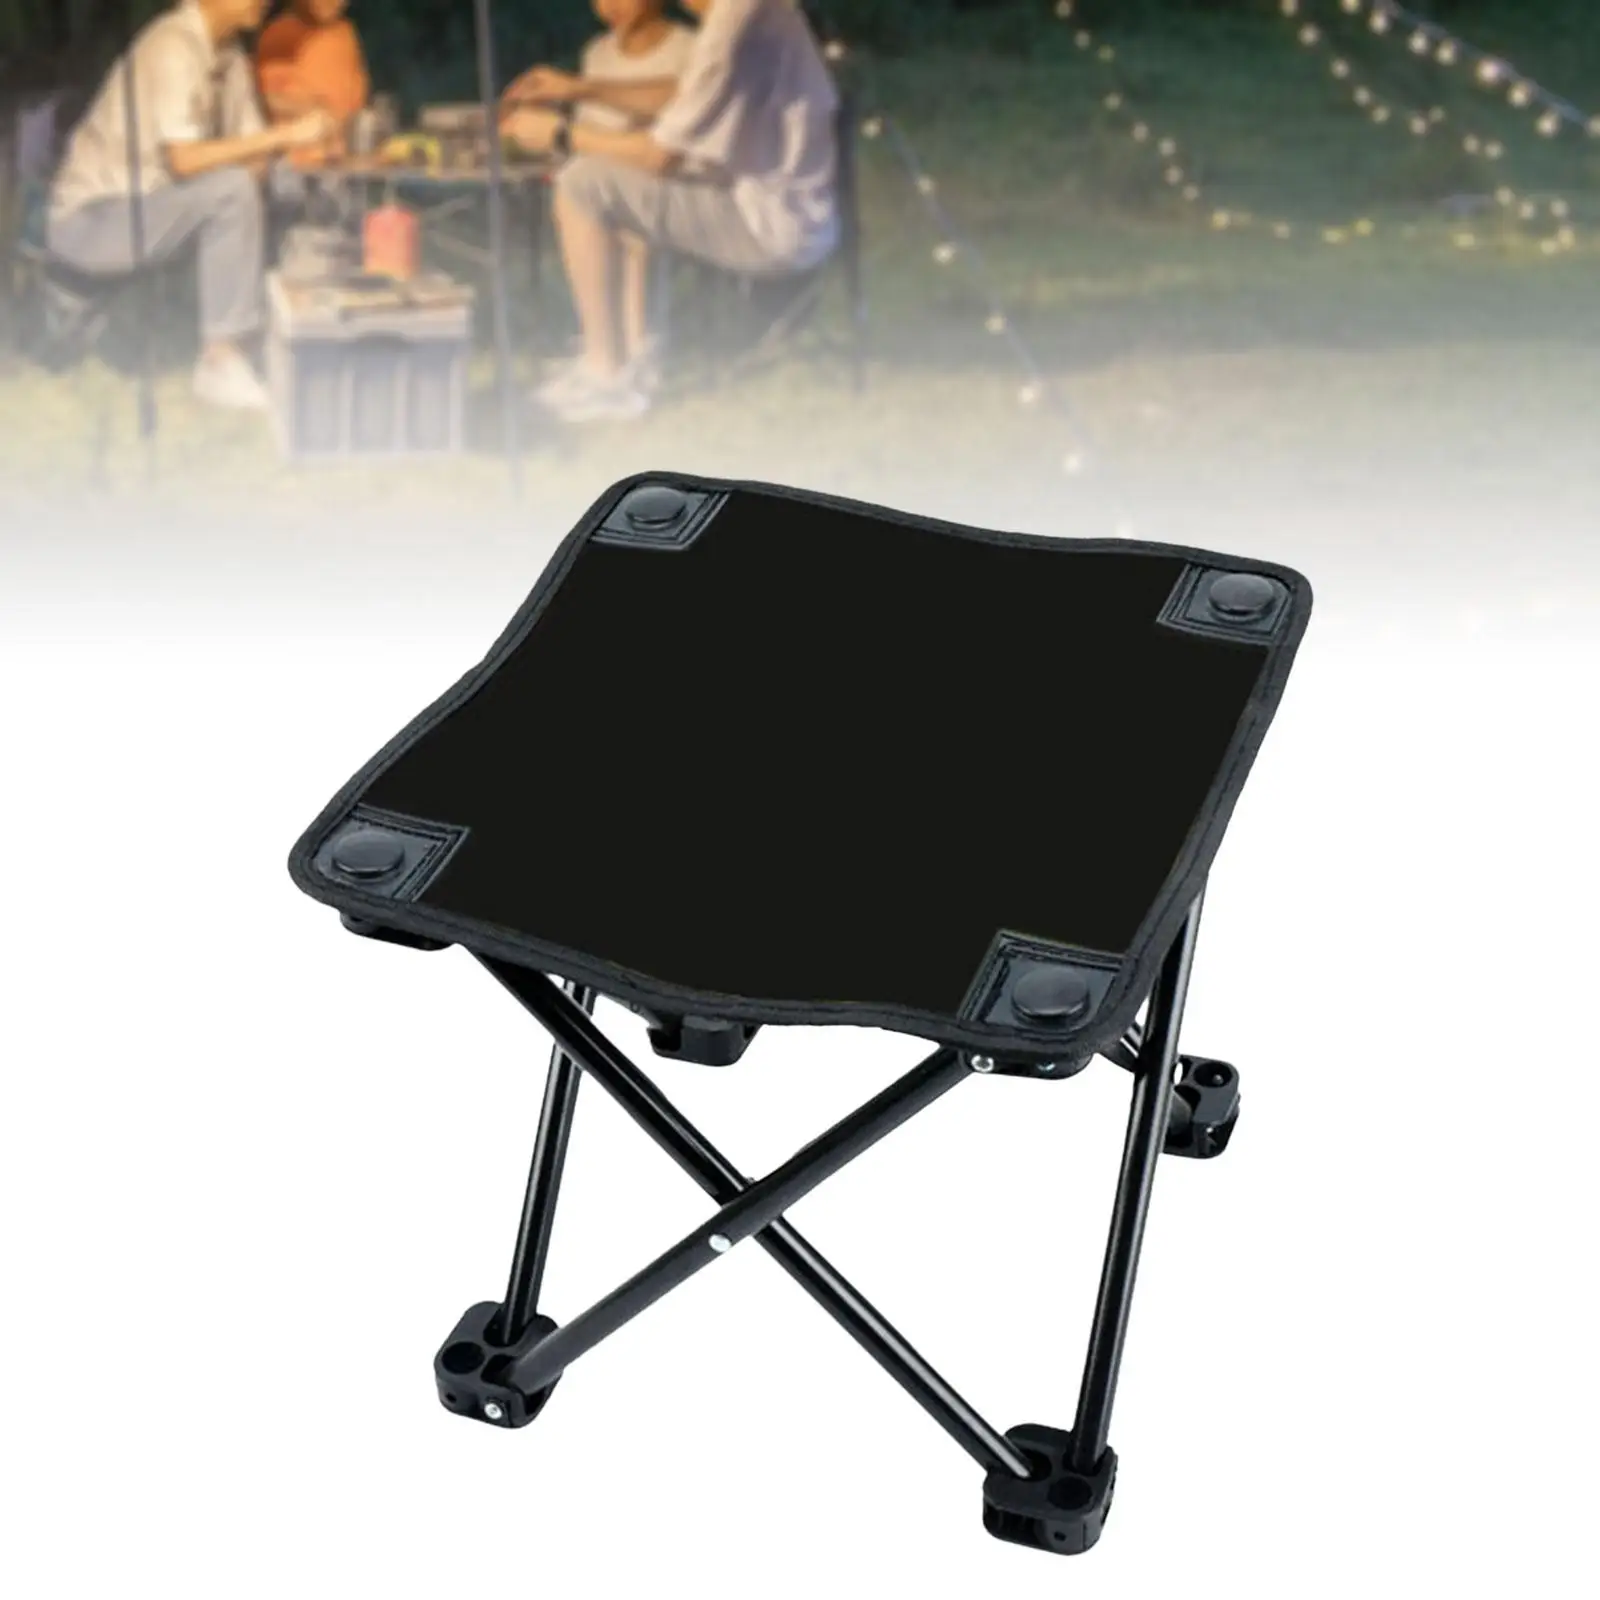 Folding Camping Stool recliner Foot Rest Footrest Foot Stool Picnic Chair Fishing Chair for Gardening Concert BBQ Sports Lawn